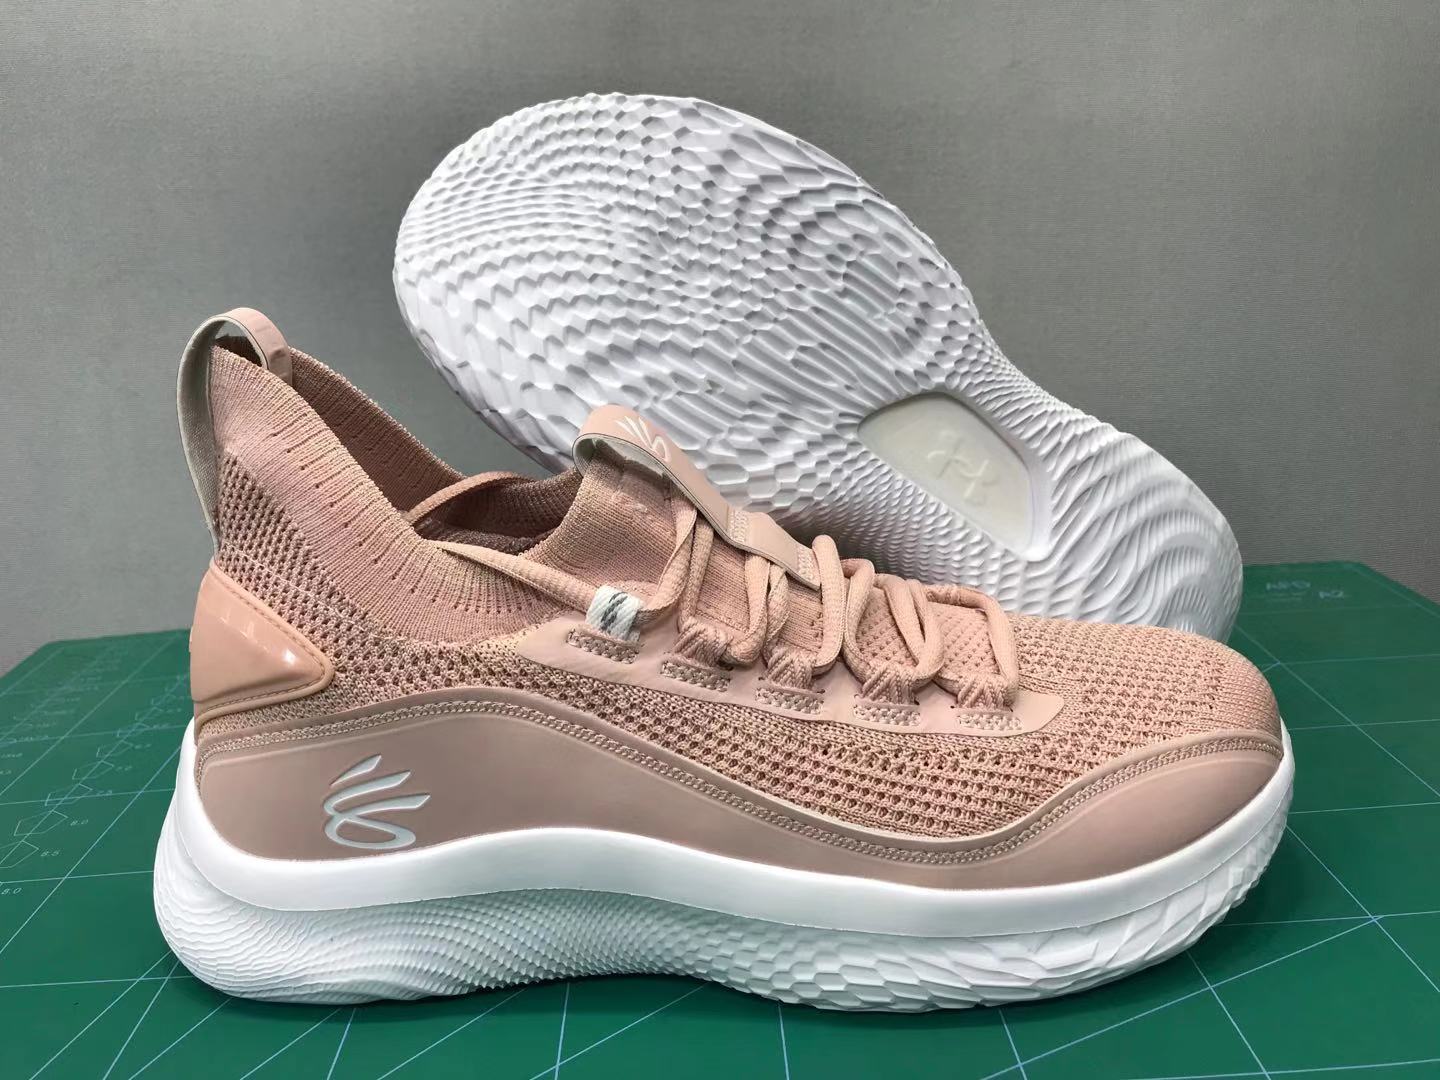 Curry Brand Curry Flow 8 Pink White For Sale – The Sole Line